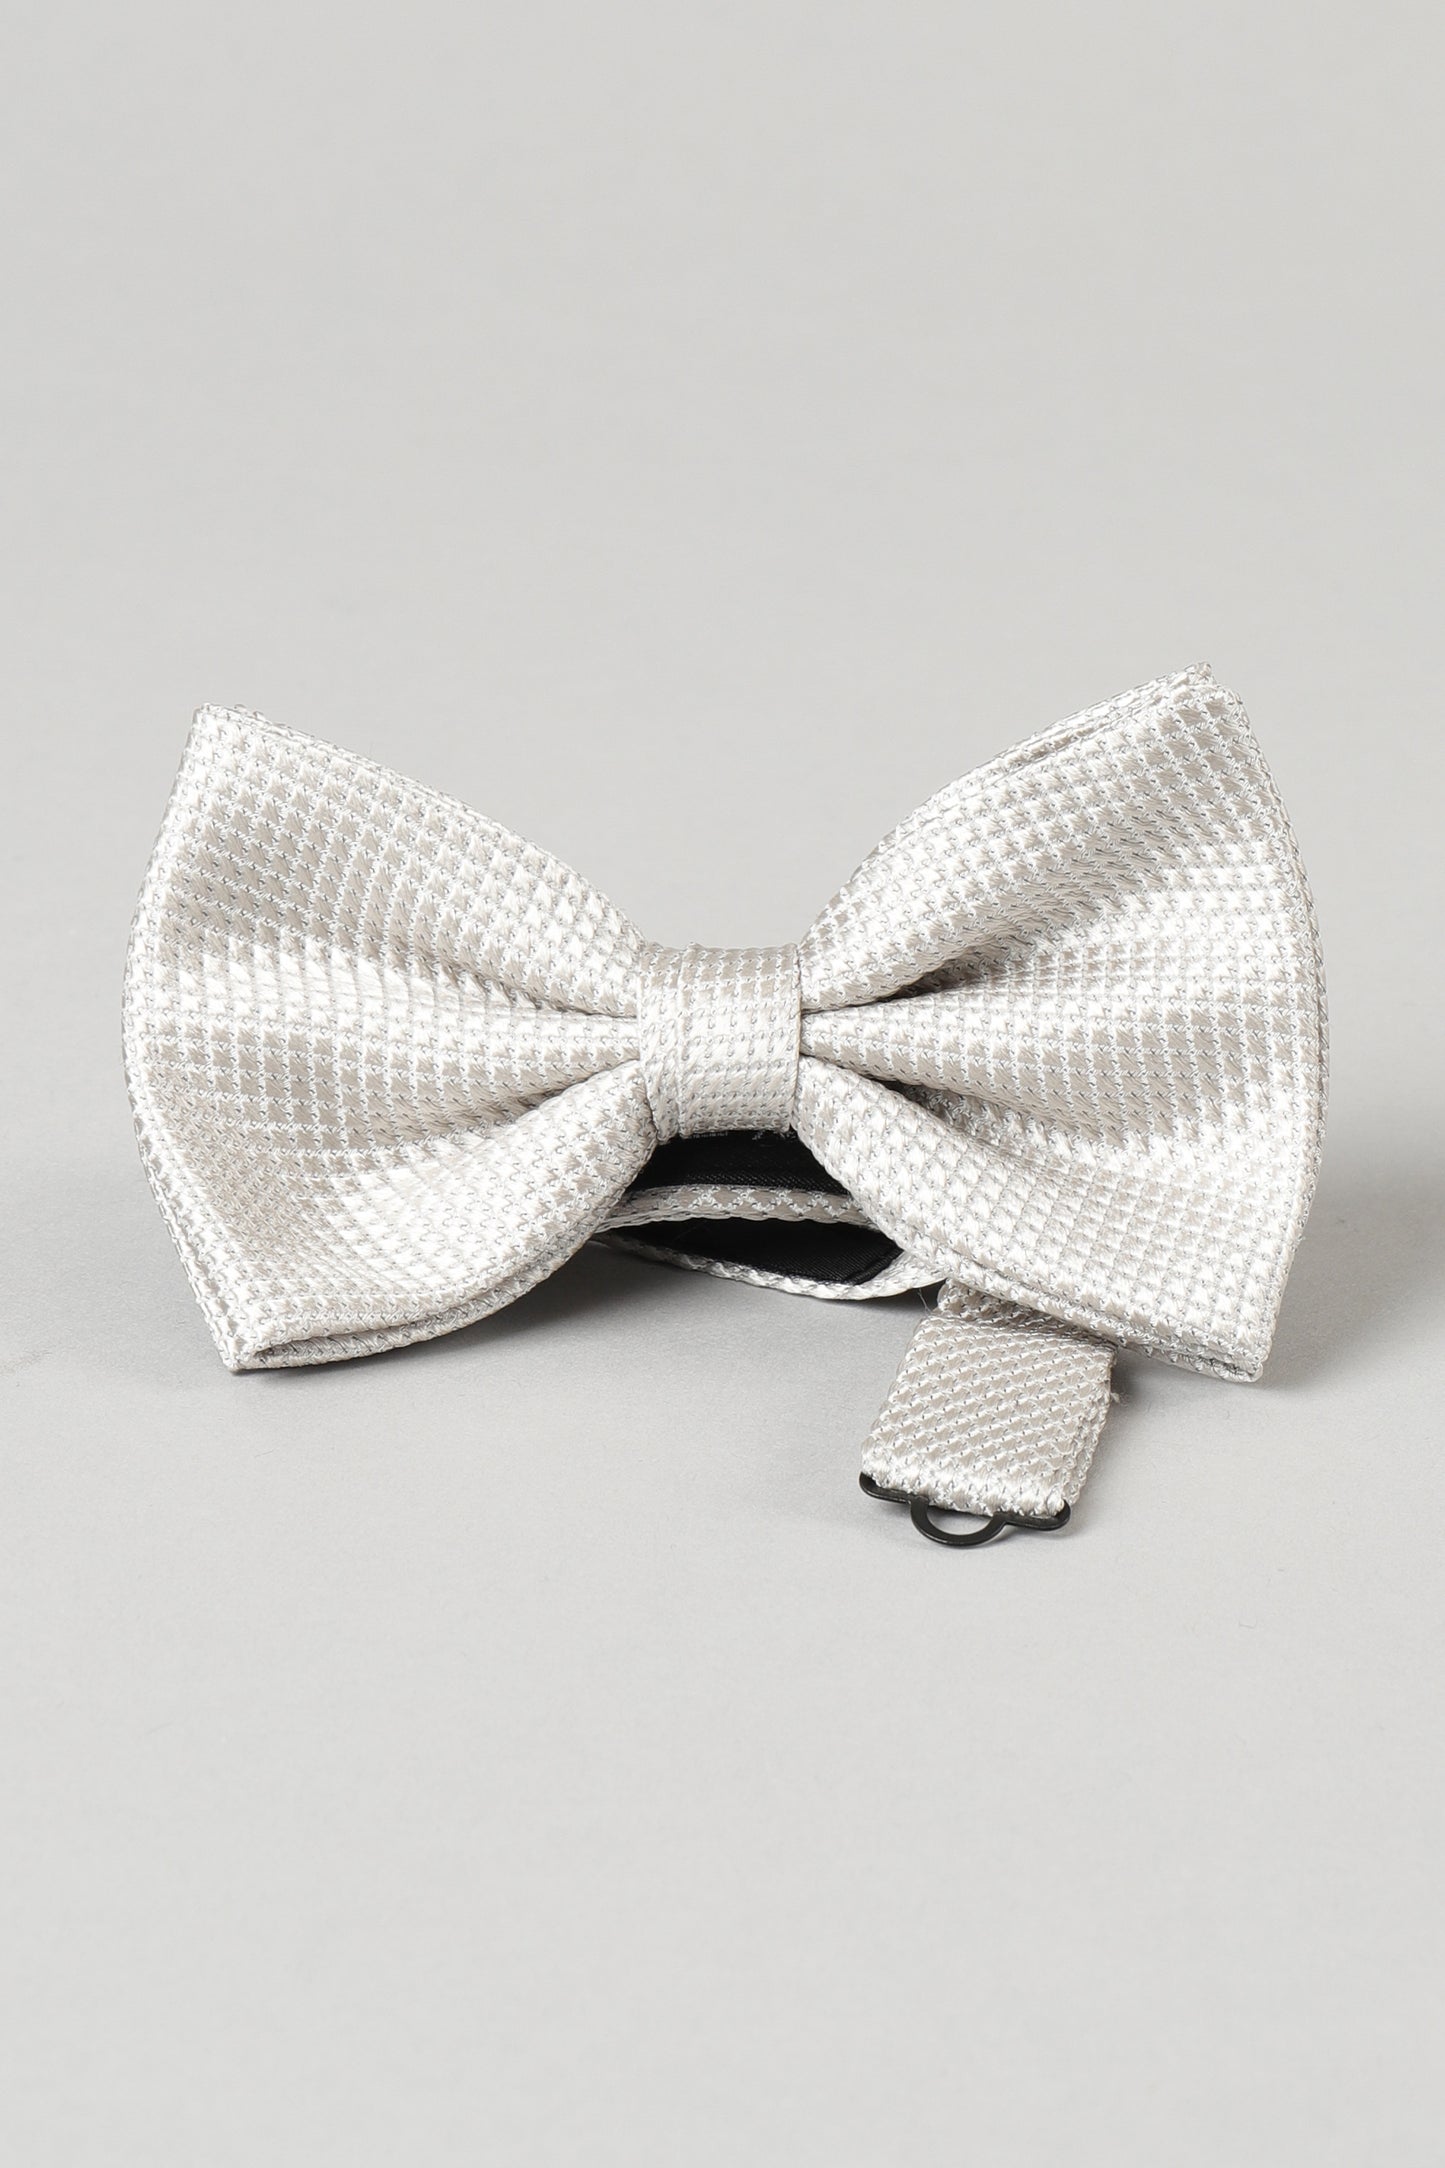  Rosi Collection Soft Knotted Bow Tie Silver For Men Argento Uomo - 1